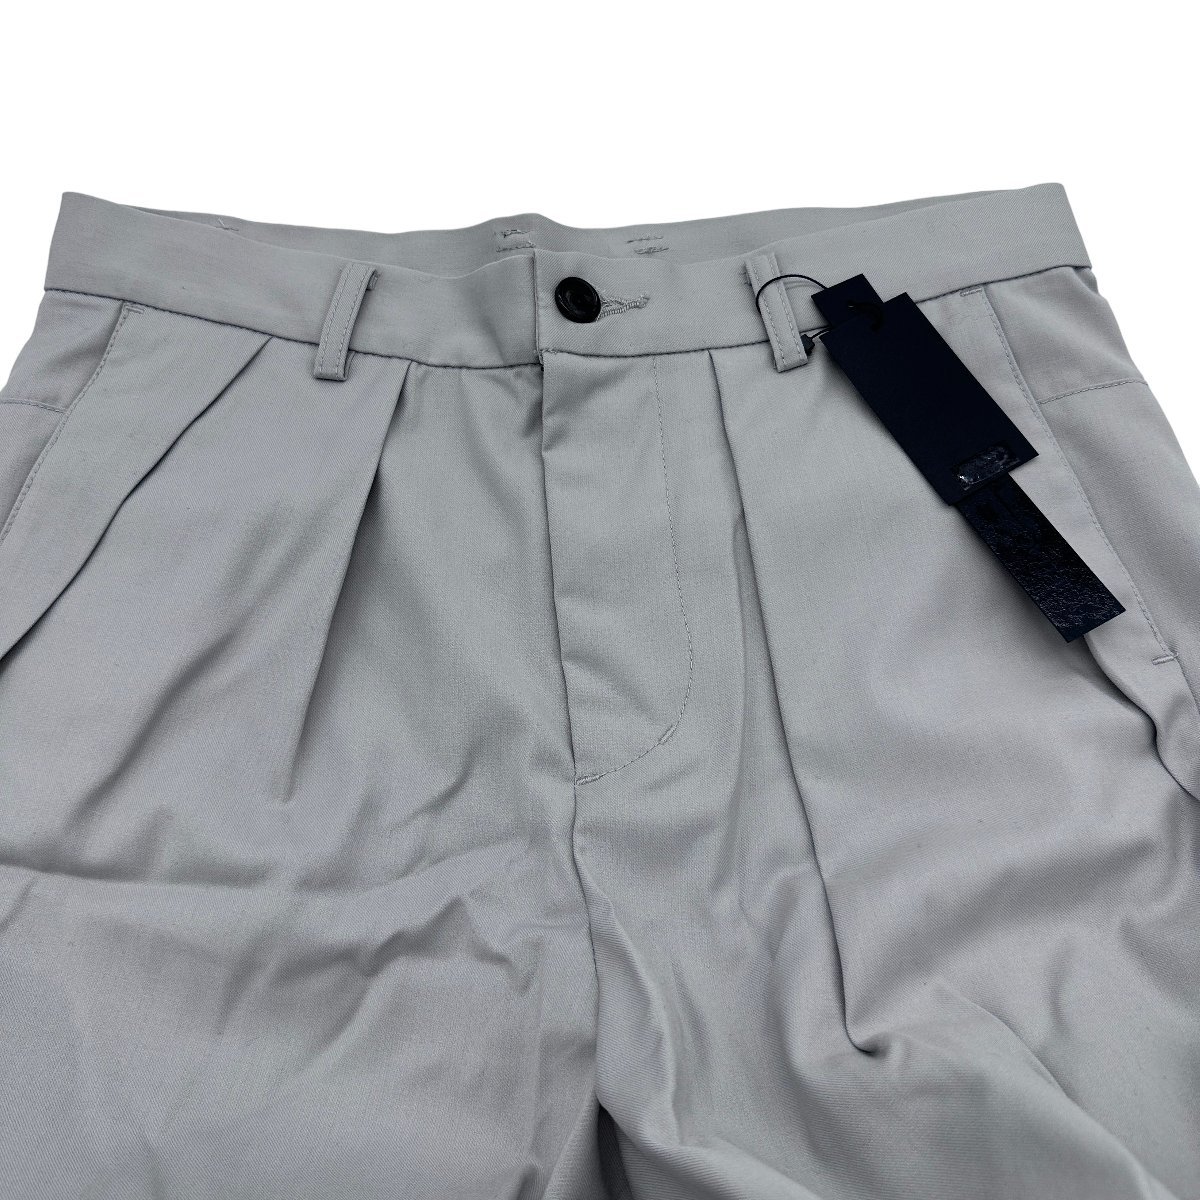 A929# new goods regular price 19000 jpy #SHELLAC shellac # tapered pants #46 size light gray 